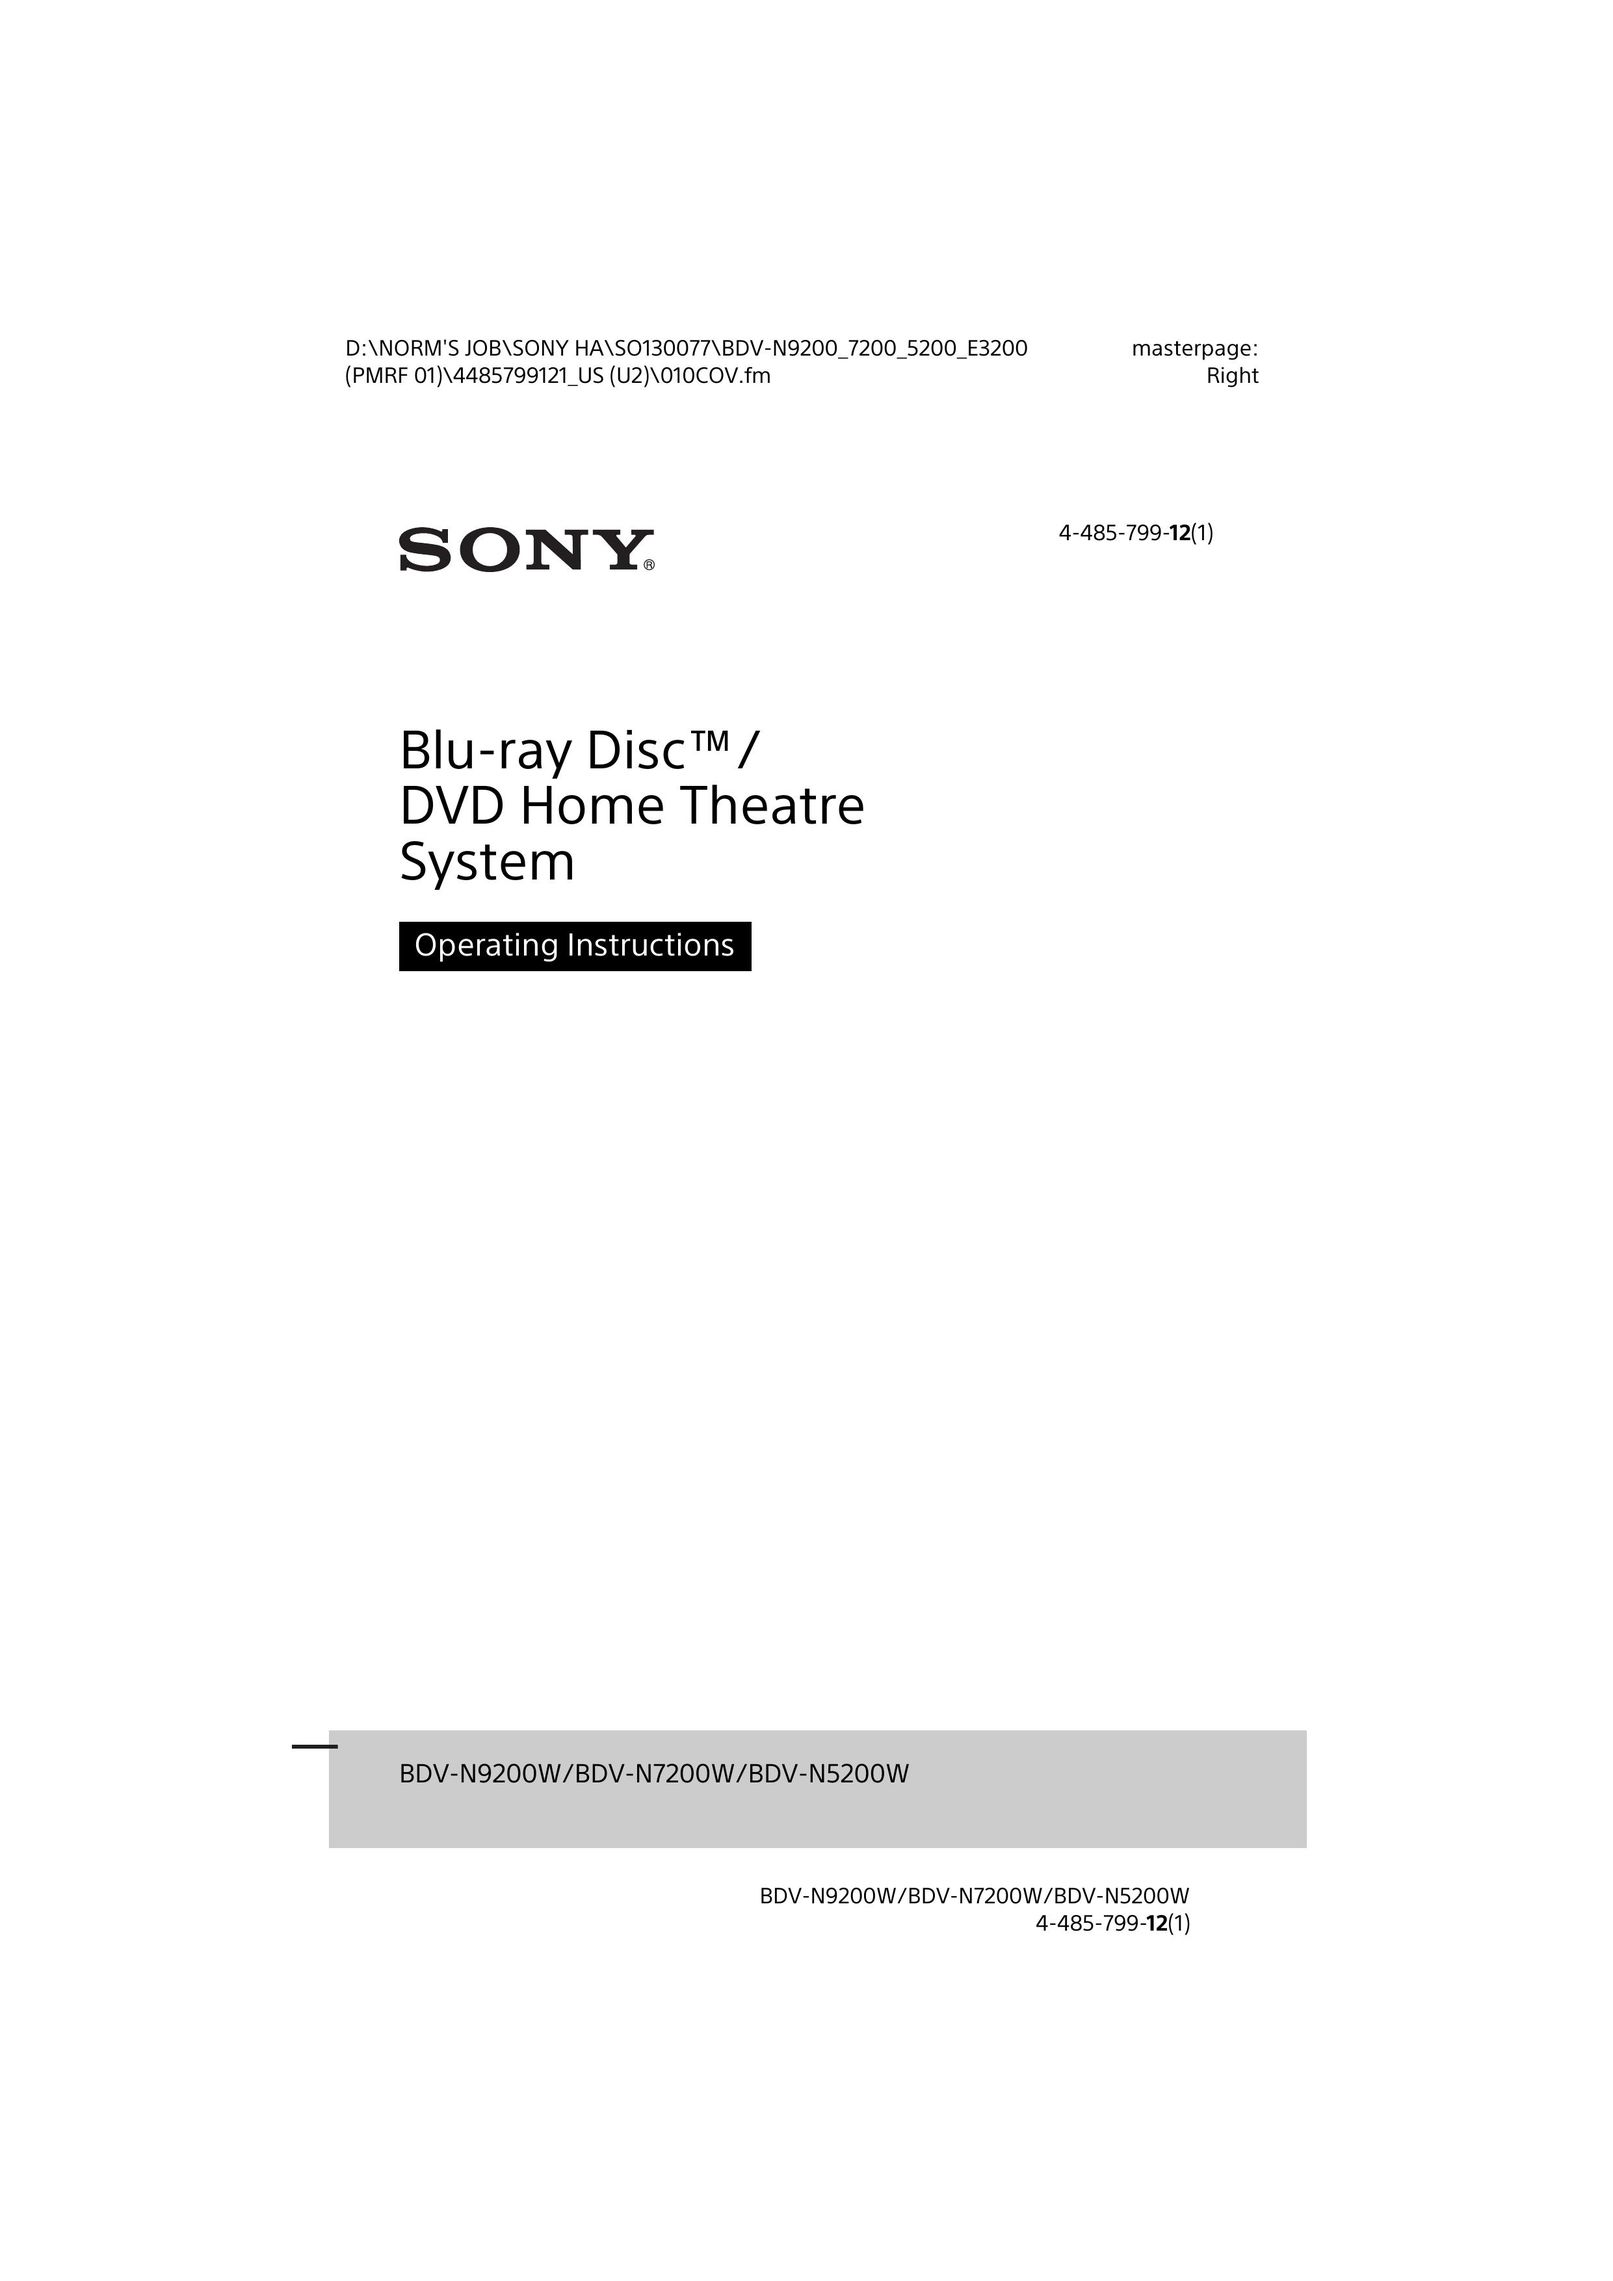 Sony BDV-N9200W Home Theater System User Manual